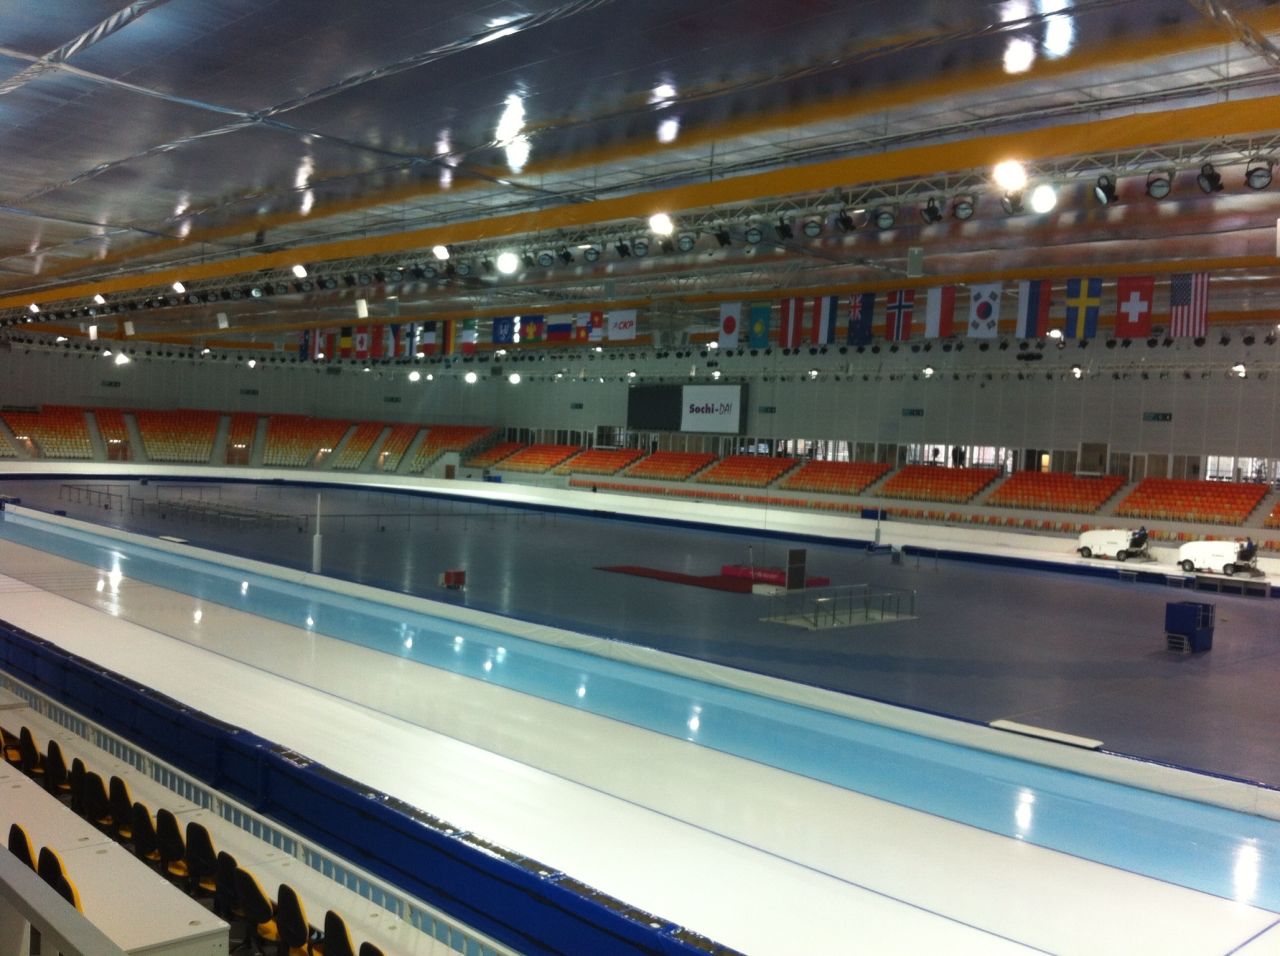 Located in the center of the Olympic Park, the Adler Arena will allow up to 8,000 spectators to watch the world's top speed skaters battle it out to claim sporting immortality.